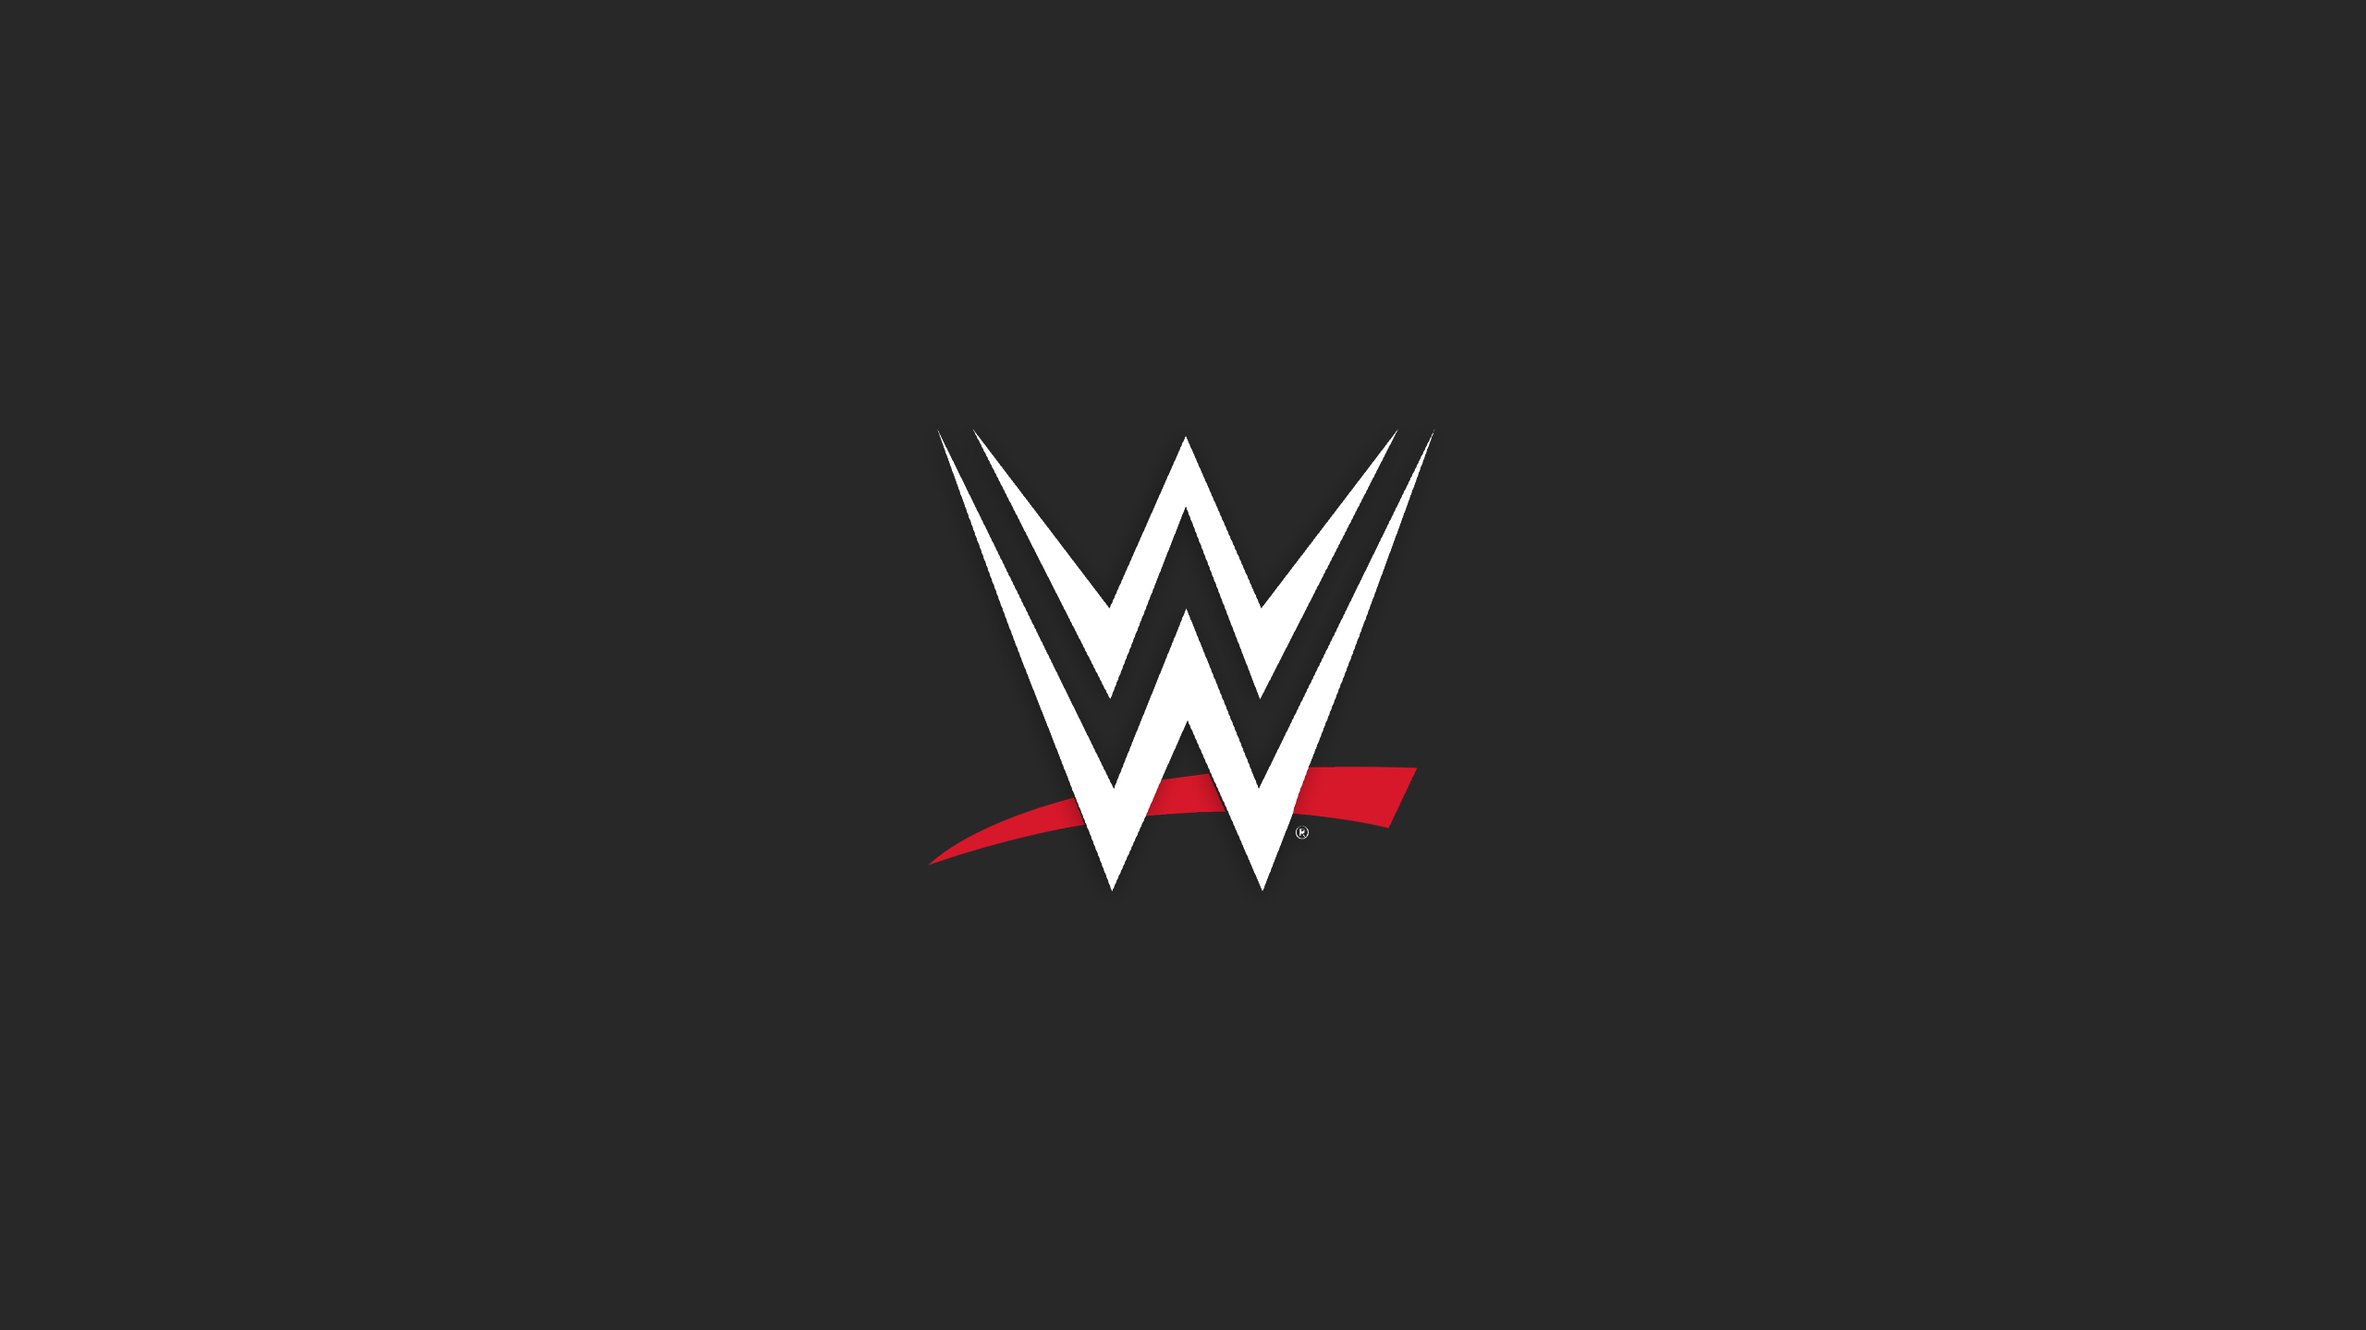 WWE is seeking an enthusiastic, detail-orientated On-Air Digital Talent